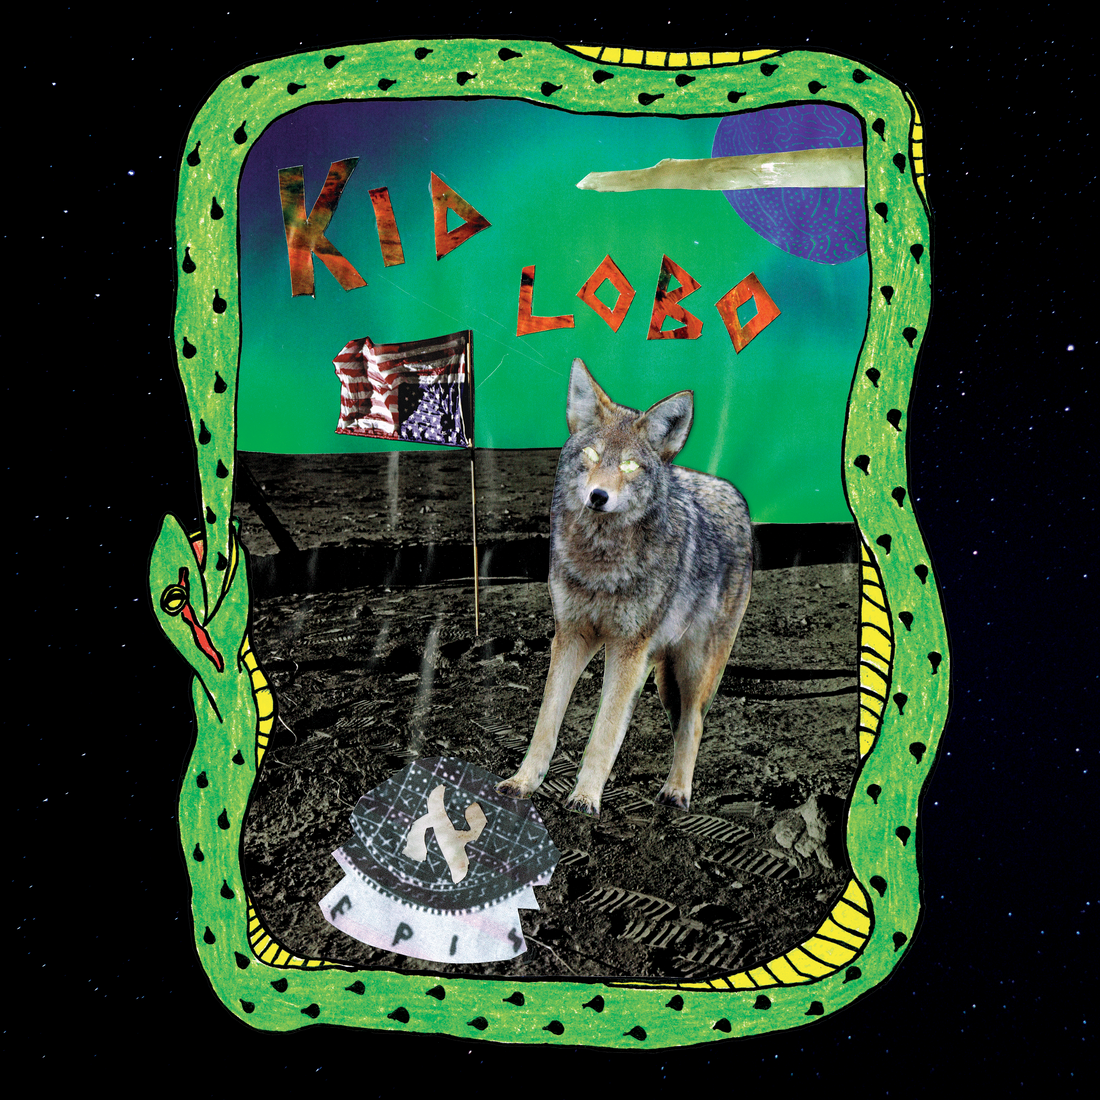 Aleph Eris releases sophomore album "Kid Lobo" - Out Now!